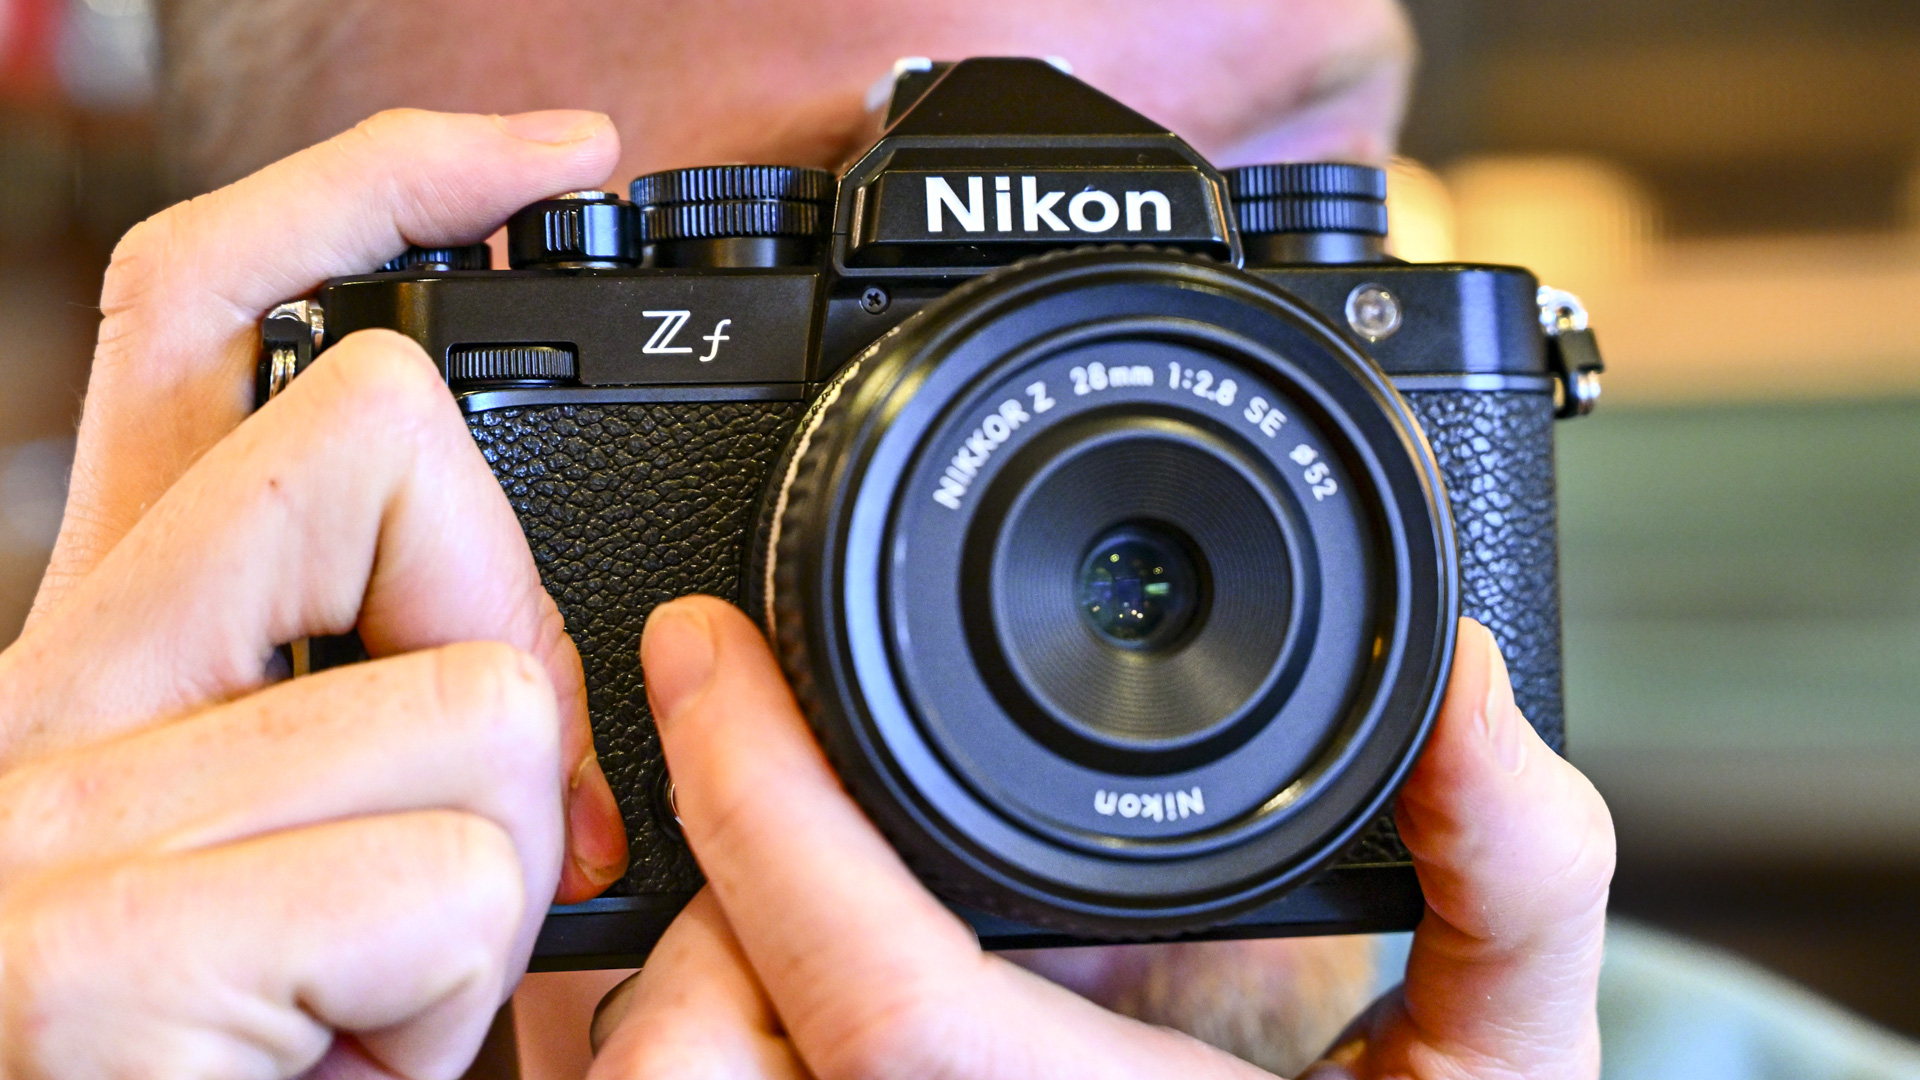 Nikon Zf camera held up to photographer's eye using the viewfinder, with Z 28mm F2.8 SE lens attached